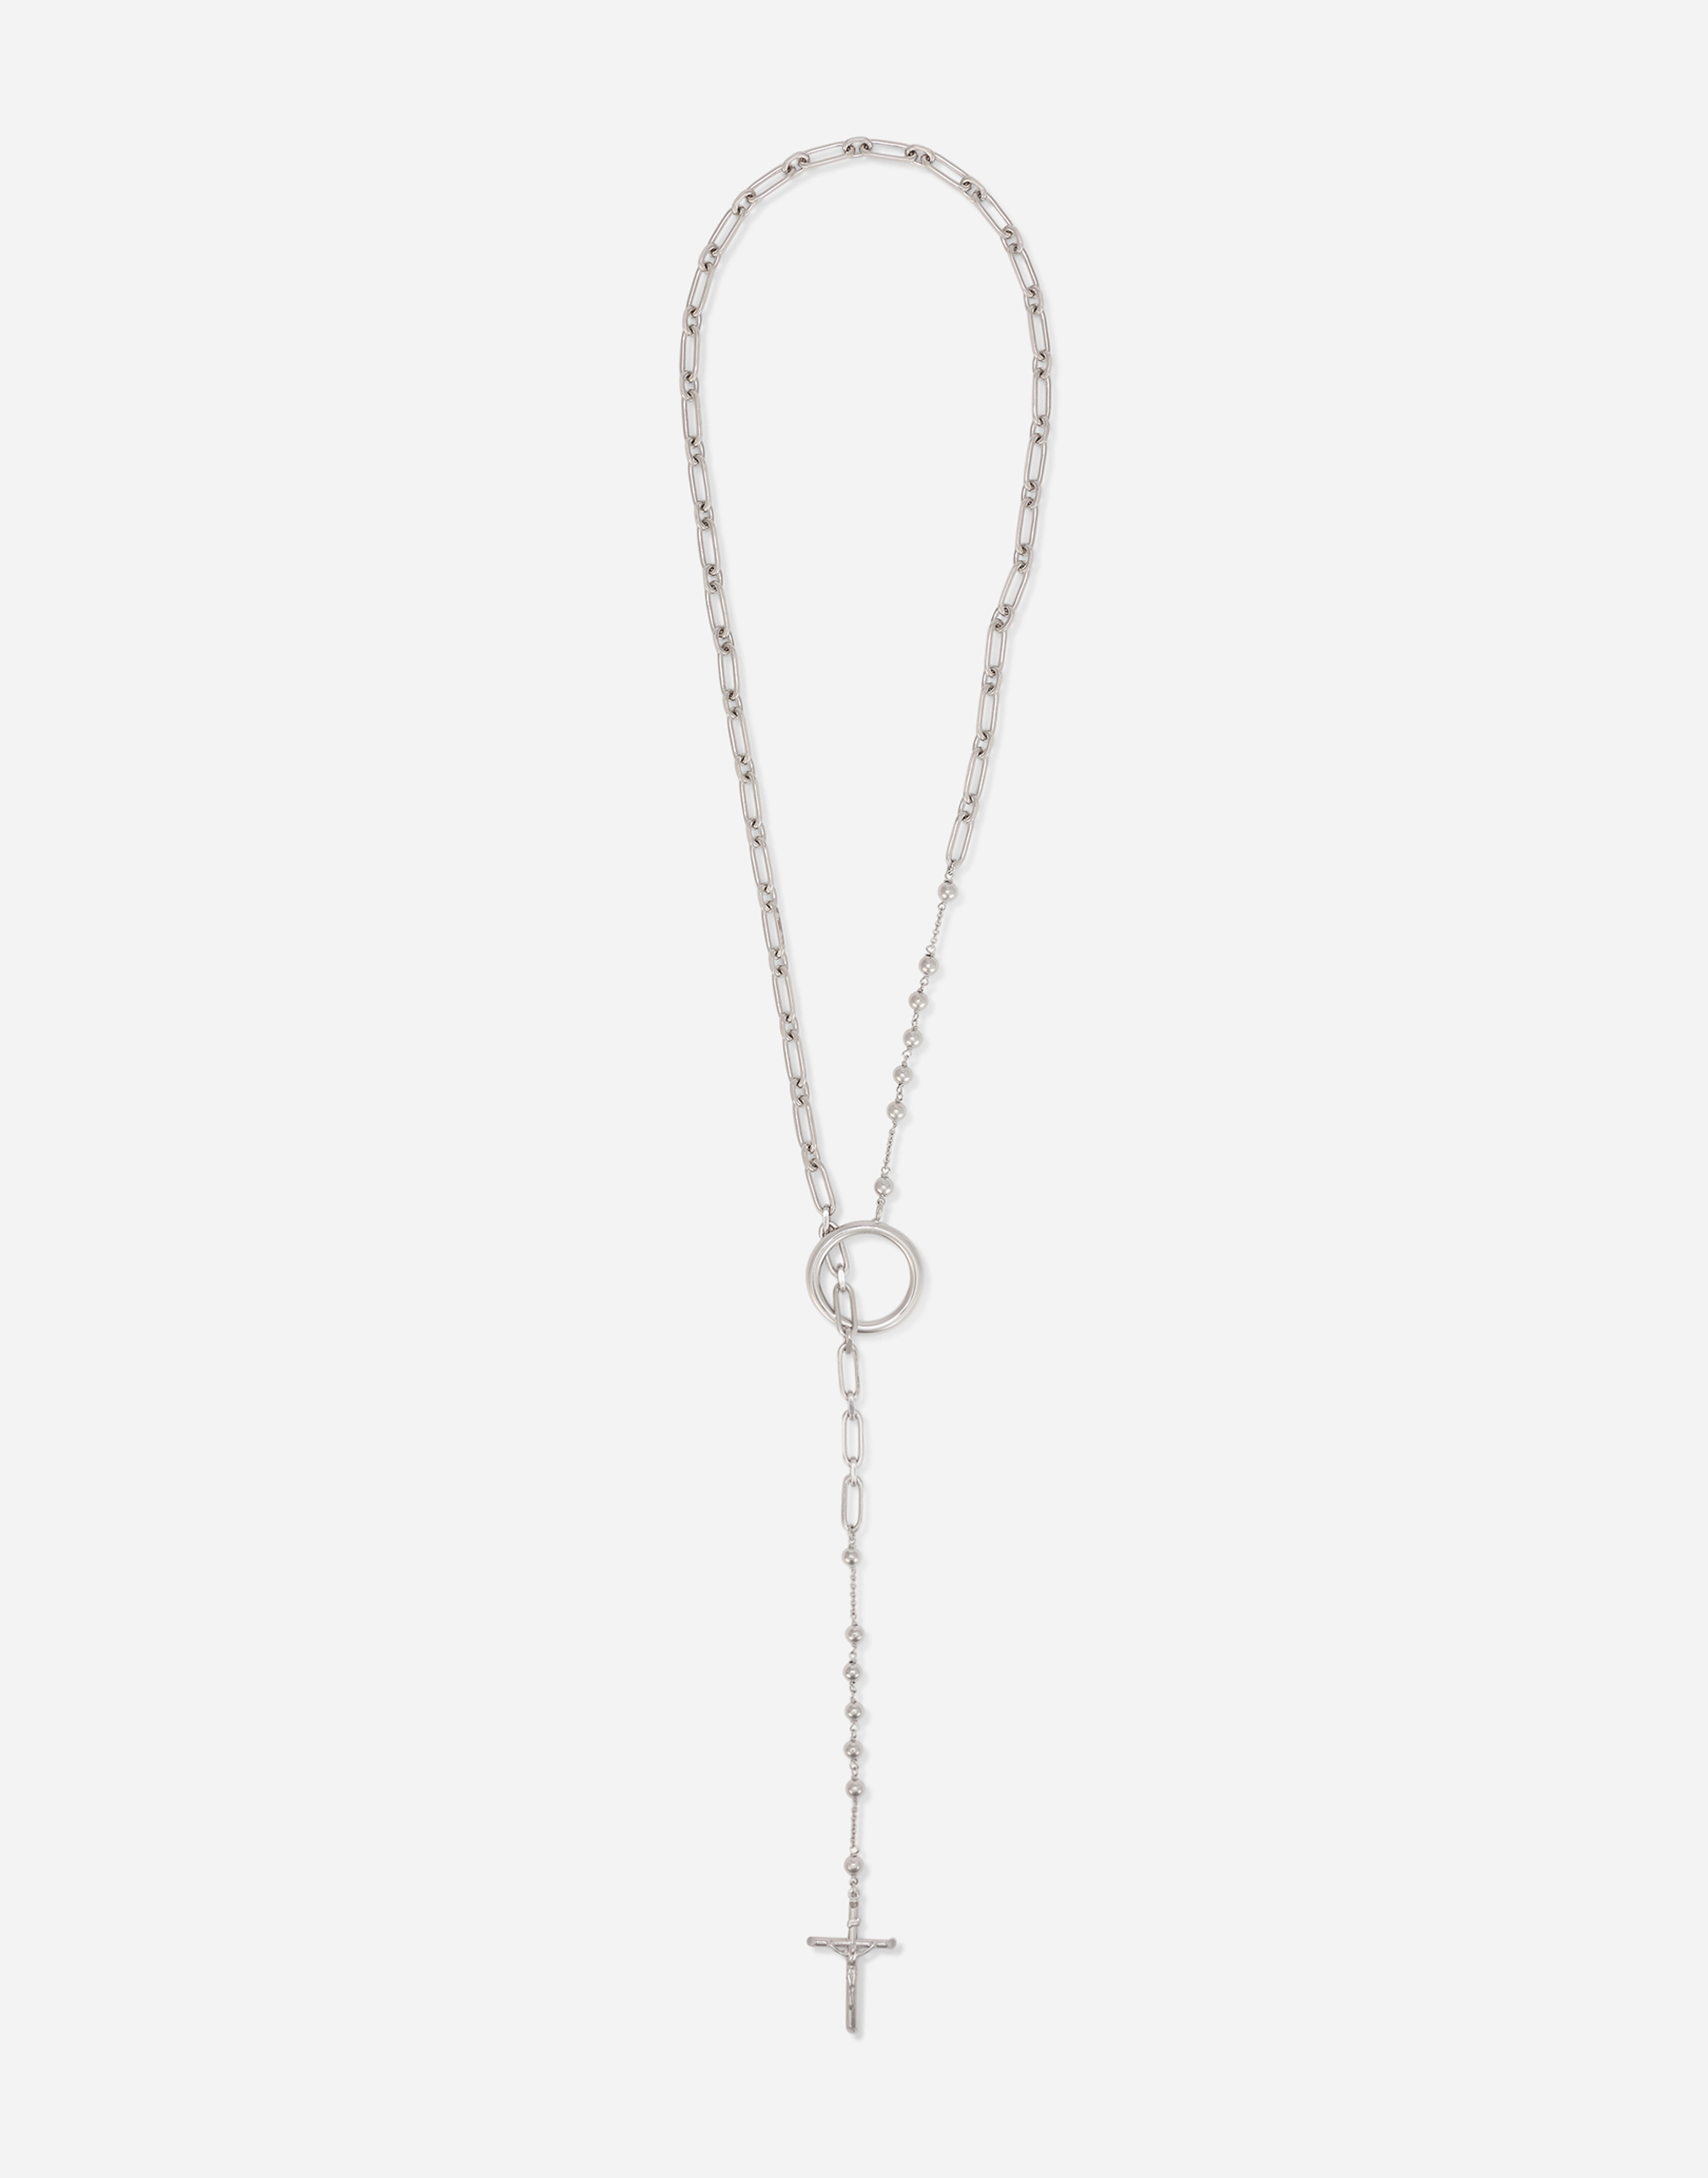 Cross necklace in Silver